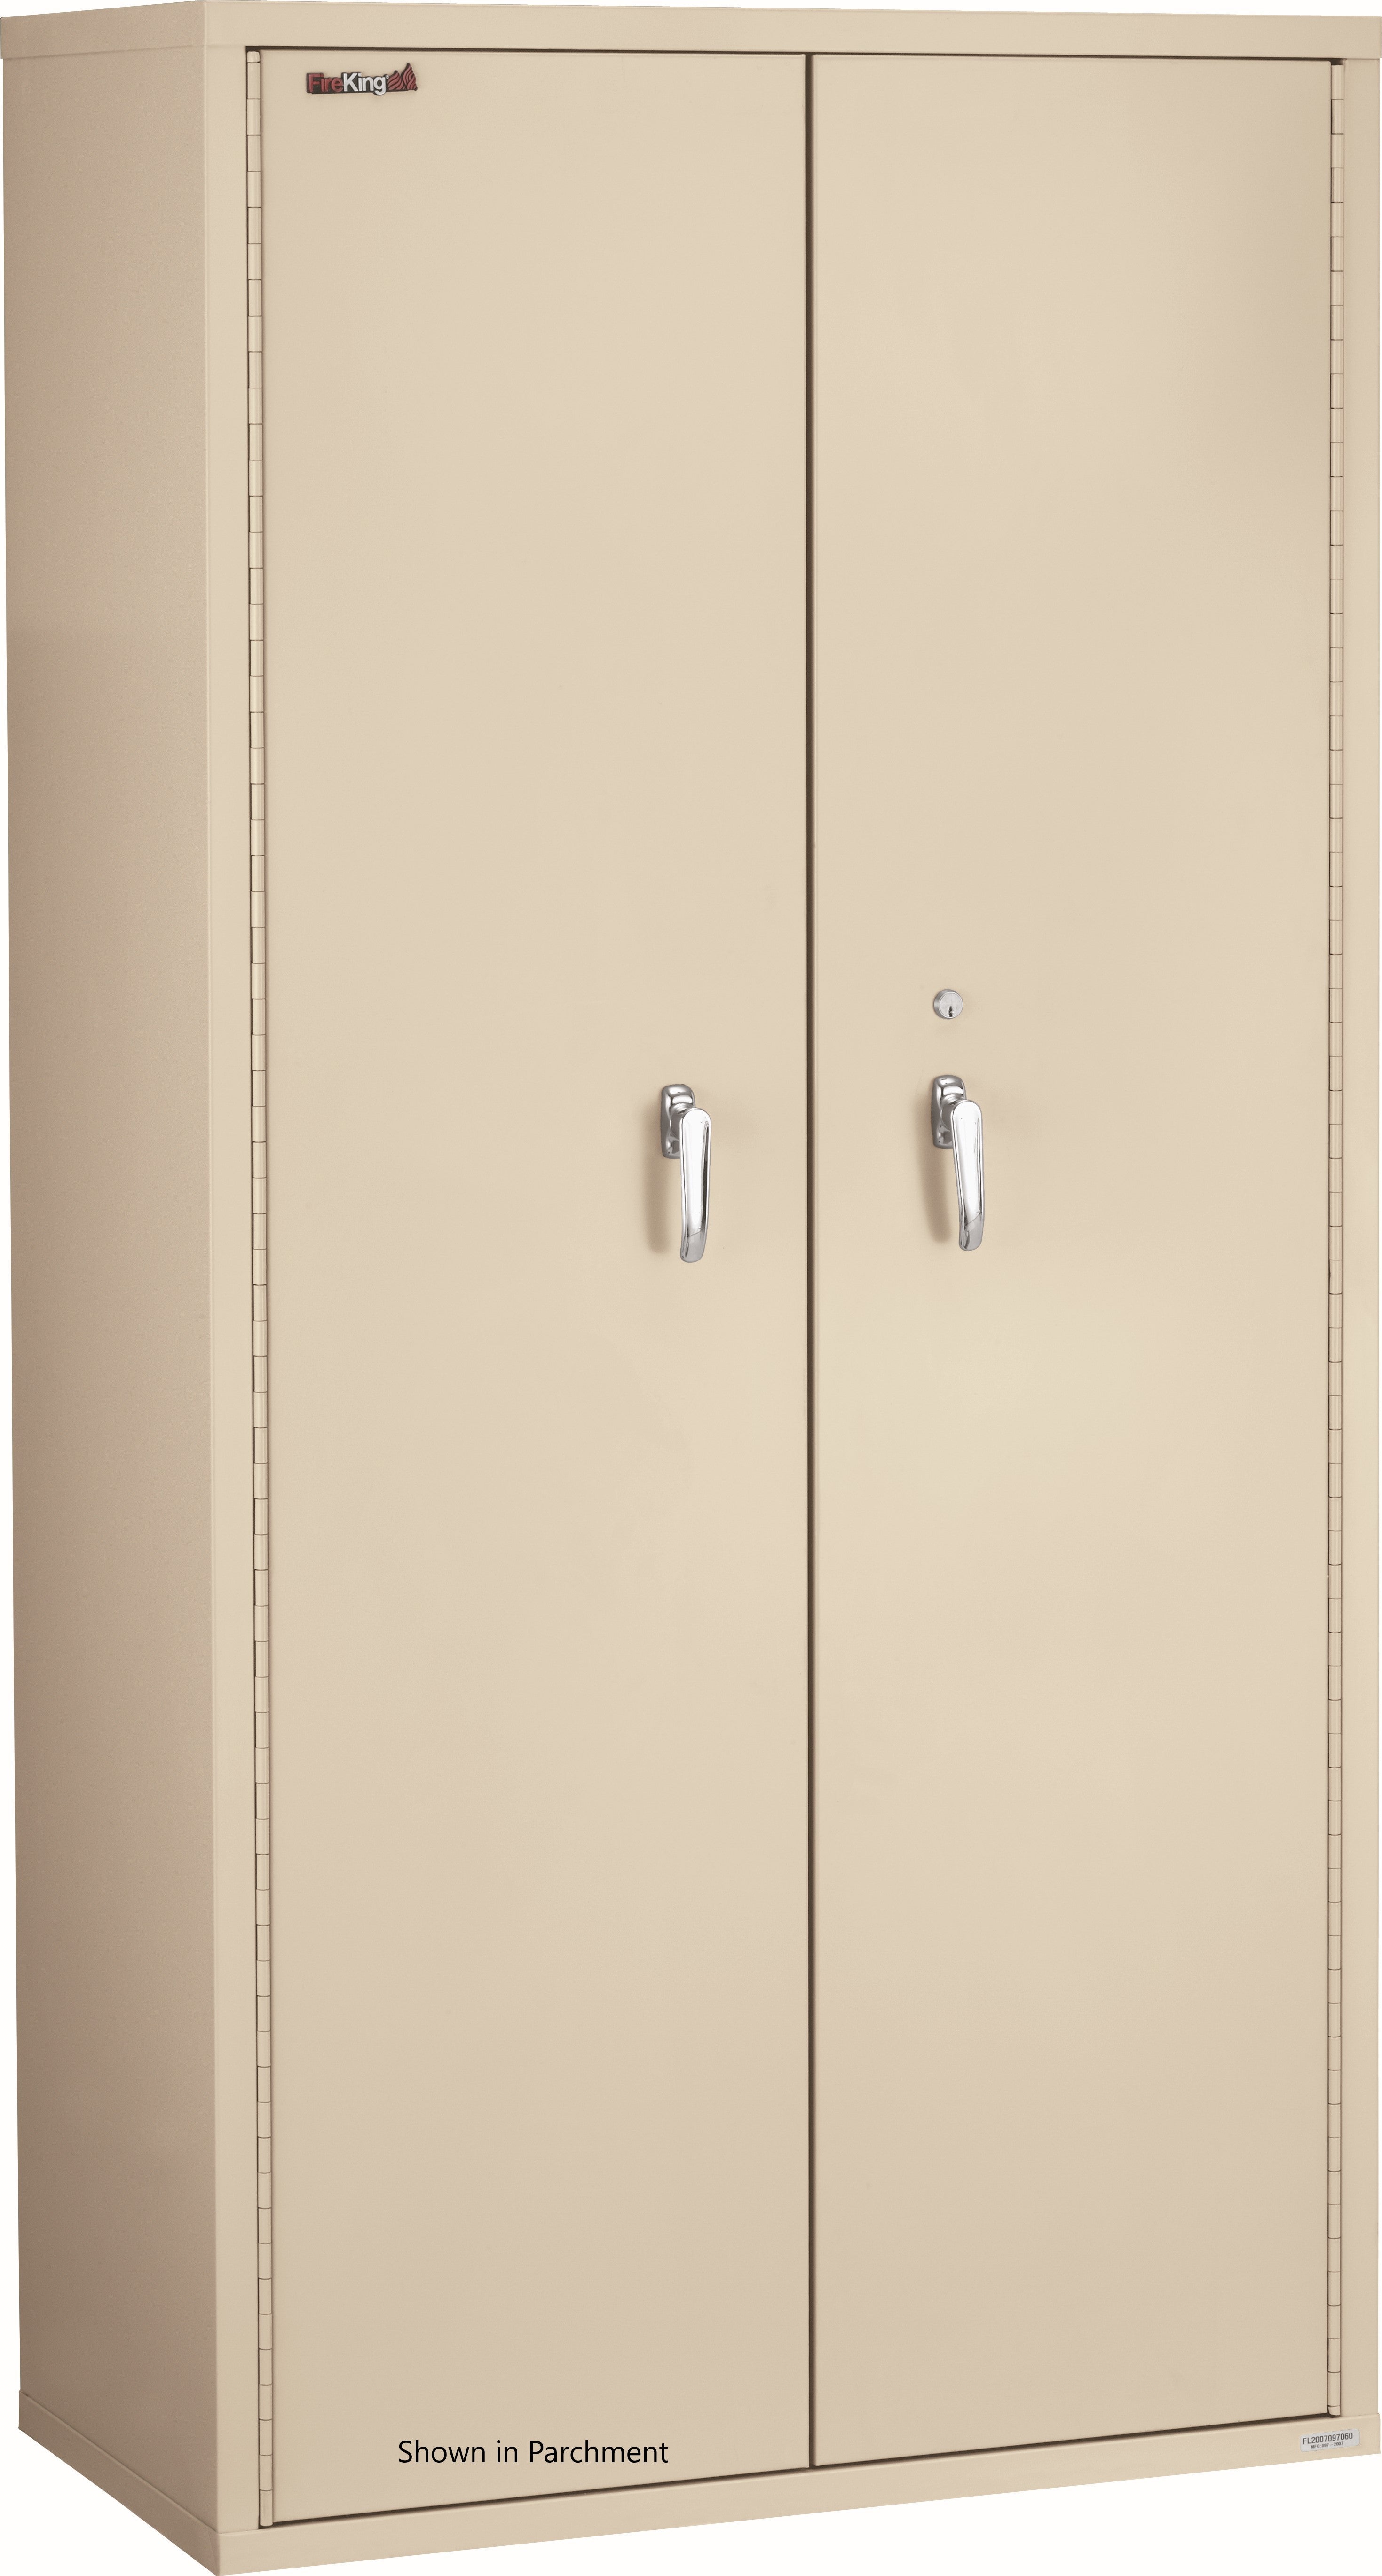 FireKing | CF-4436-D, CF7236-D | Storage Cabinet | 1-Hour Fire Rated 2 Sizes, 11 Colors